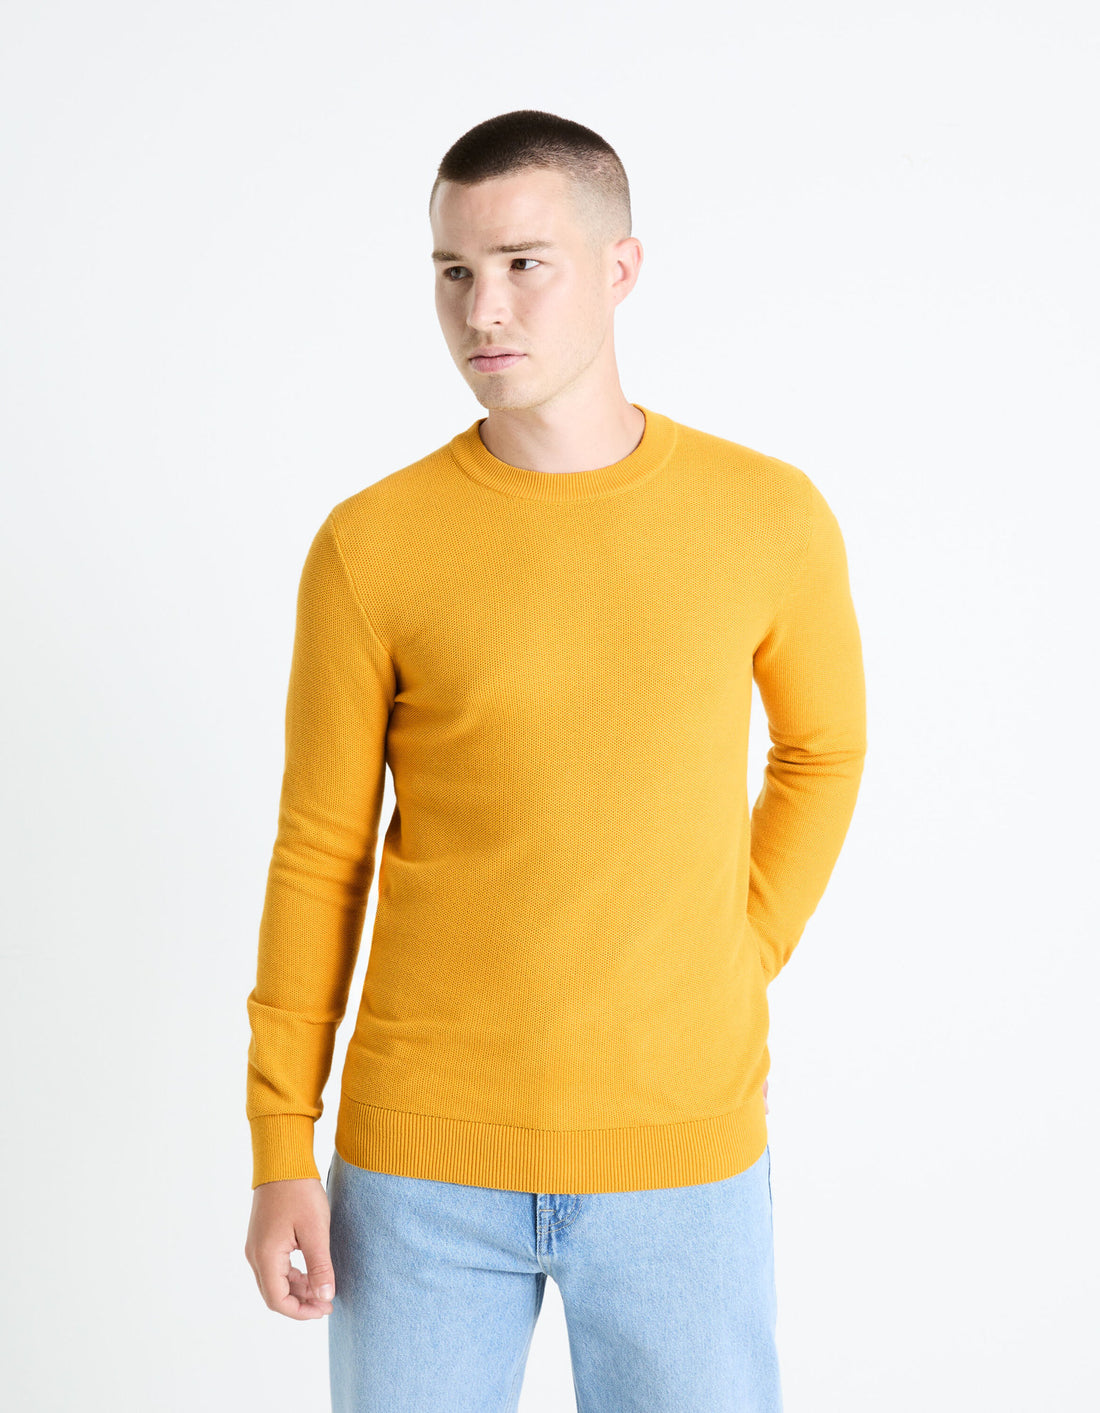 100% Cotton Round Neck Sweater - Yellow_BEPIC_JAUNE MOUTARDE_01